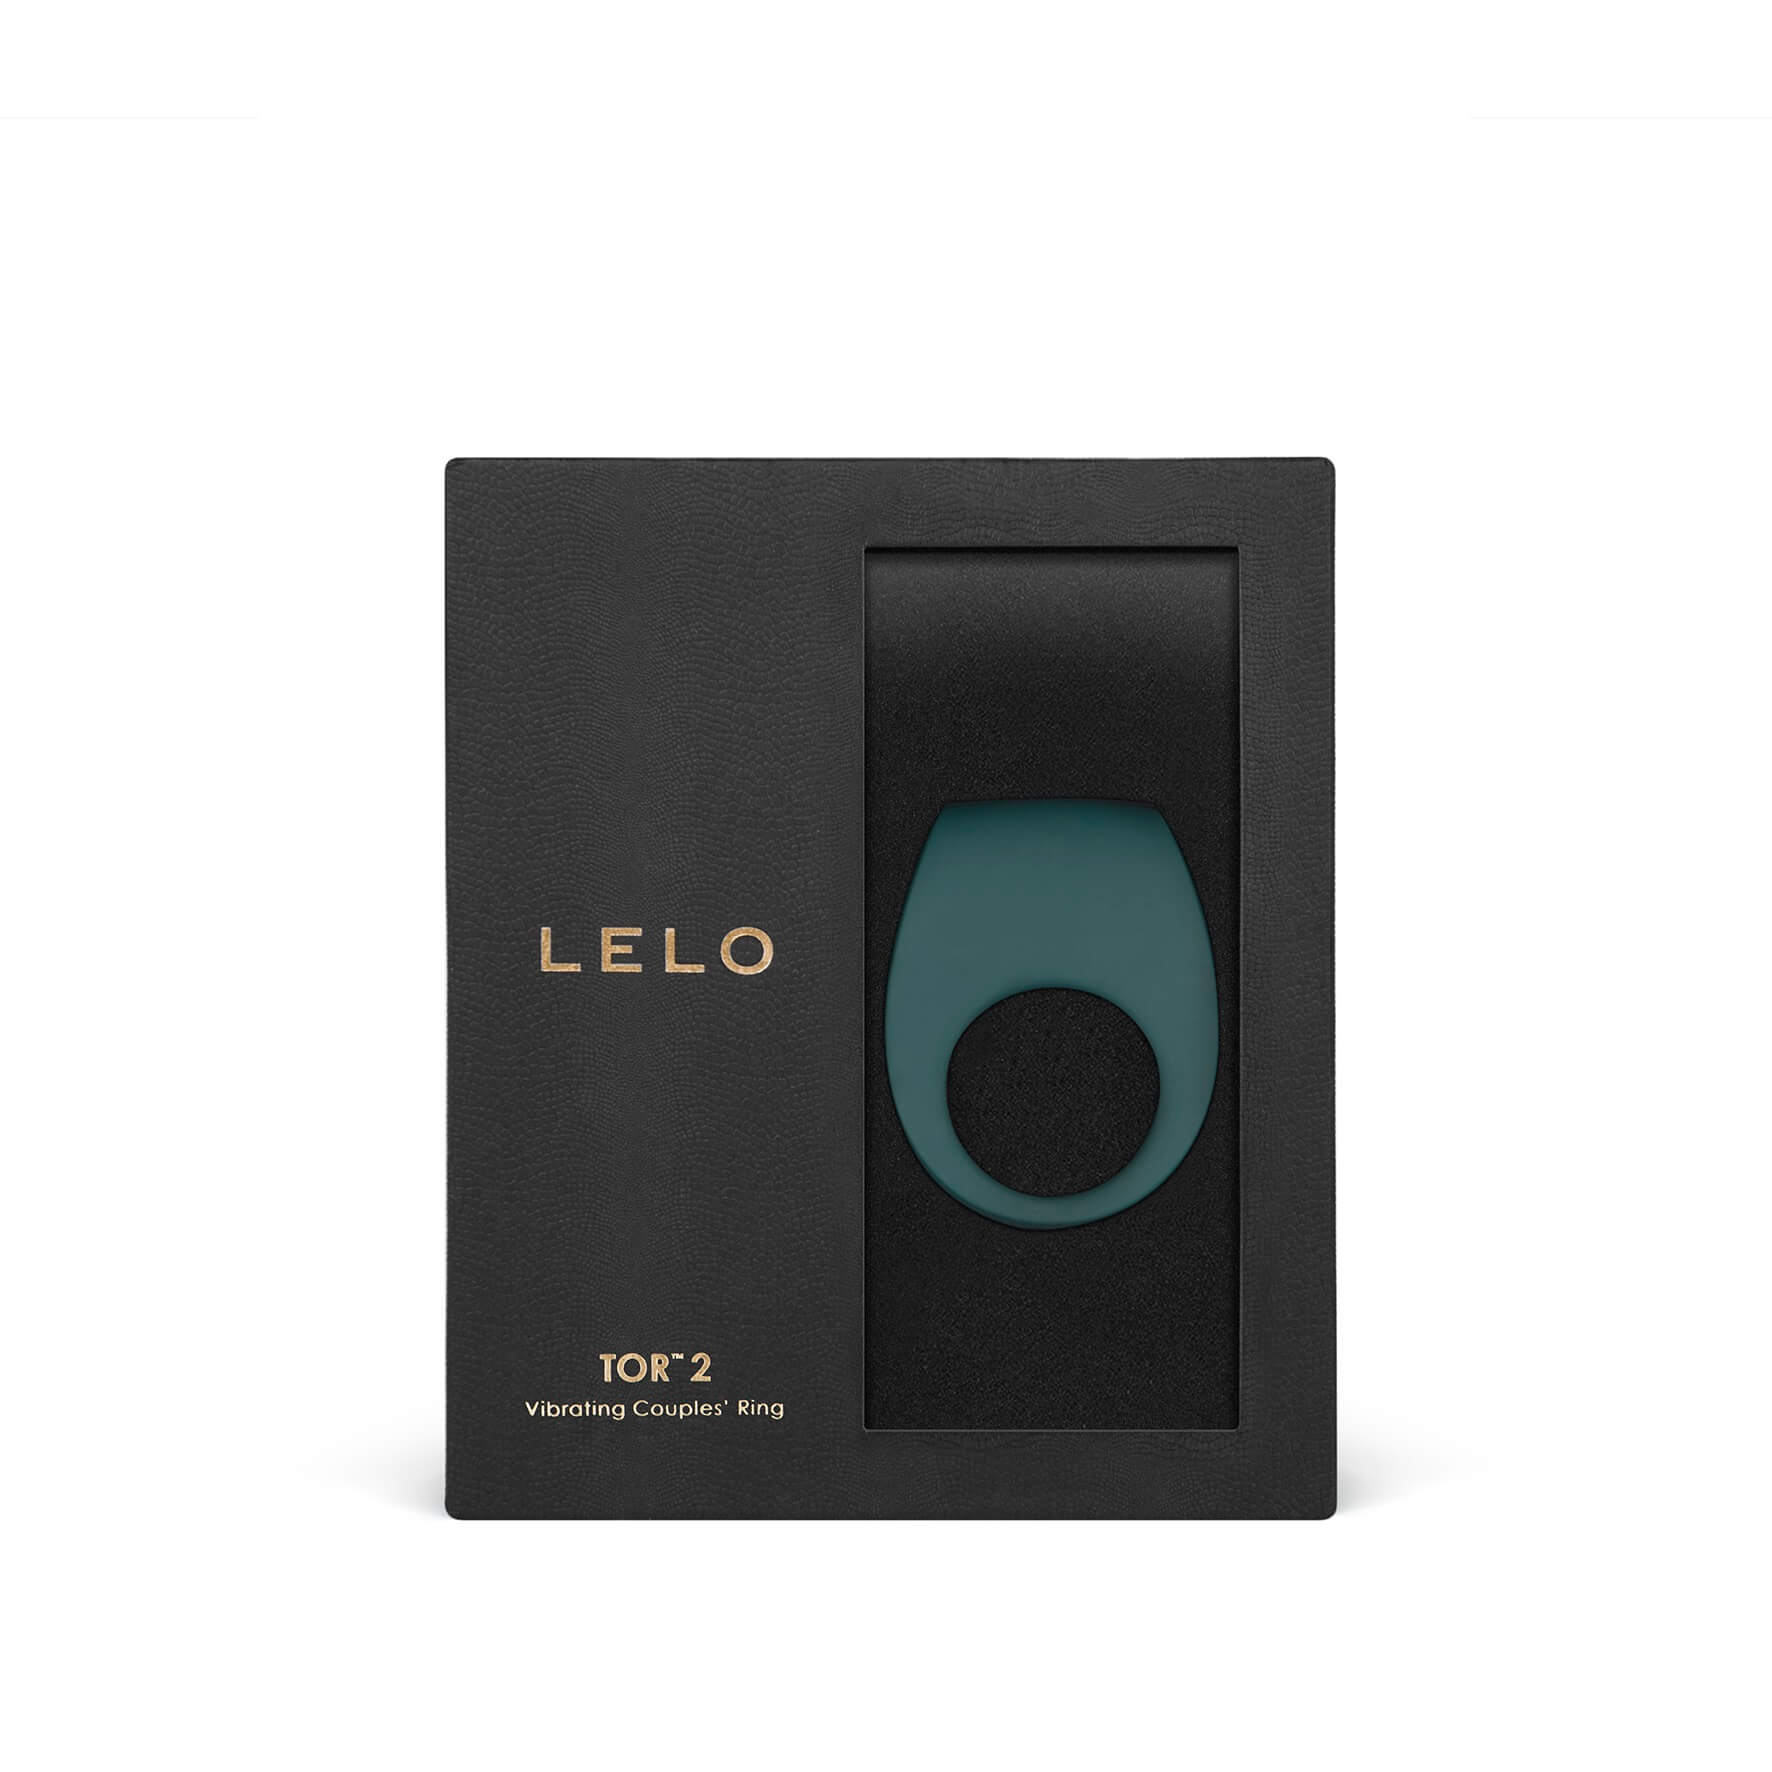 LELO Tor II - The Bigger O online sex toy shop USA, Canada & UK shipping available